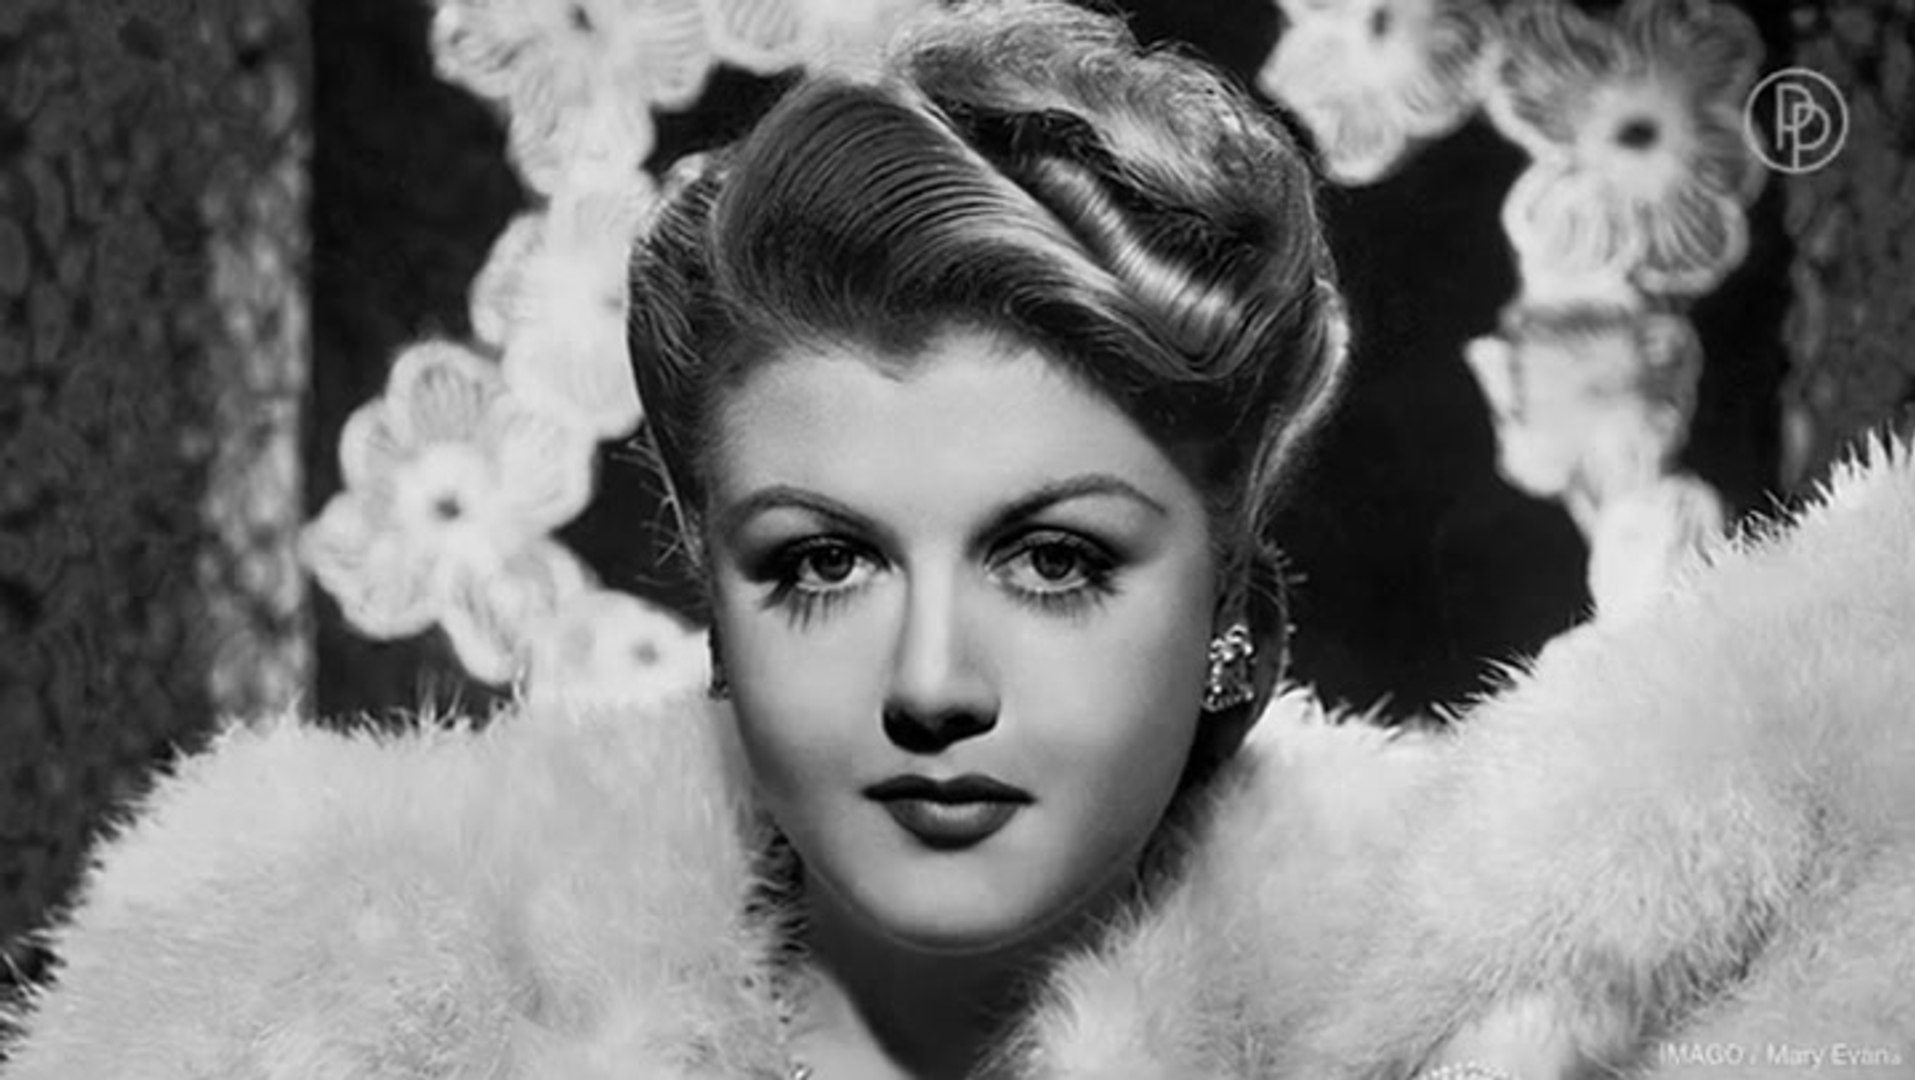 How Angela Lansbury Rescued Her Daughter From 'Crowd Led By Charles Manson